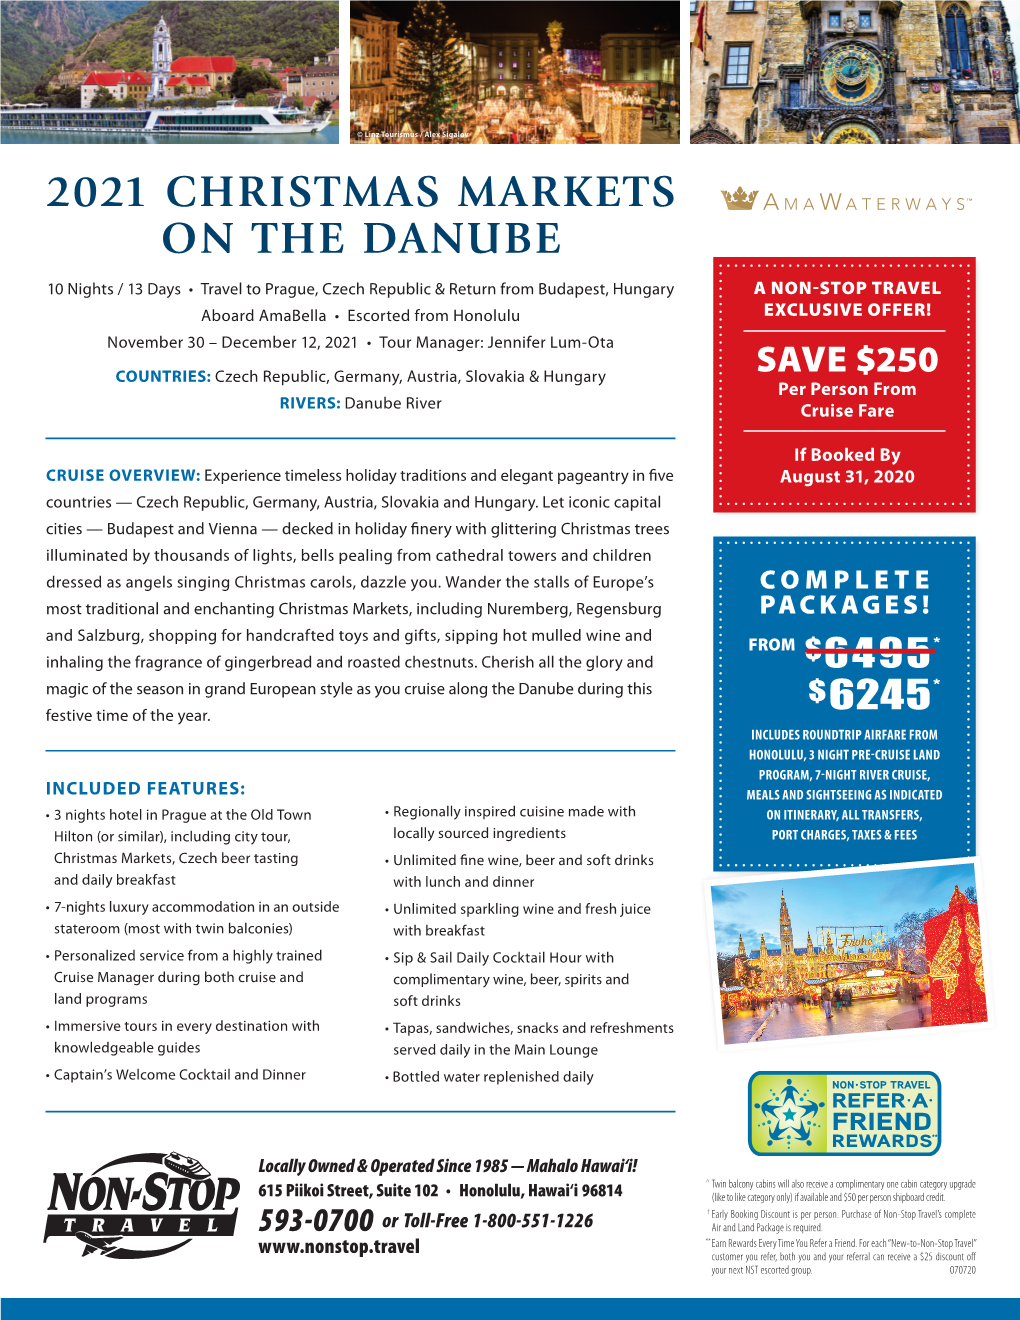 2021 Christmas Markets on the Danube